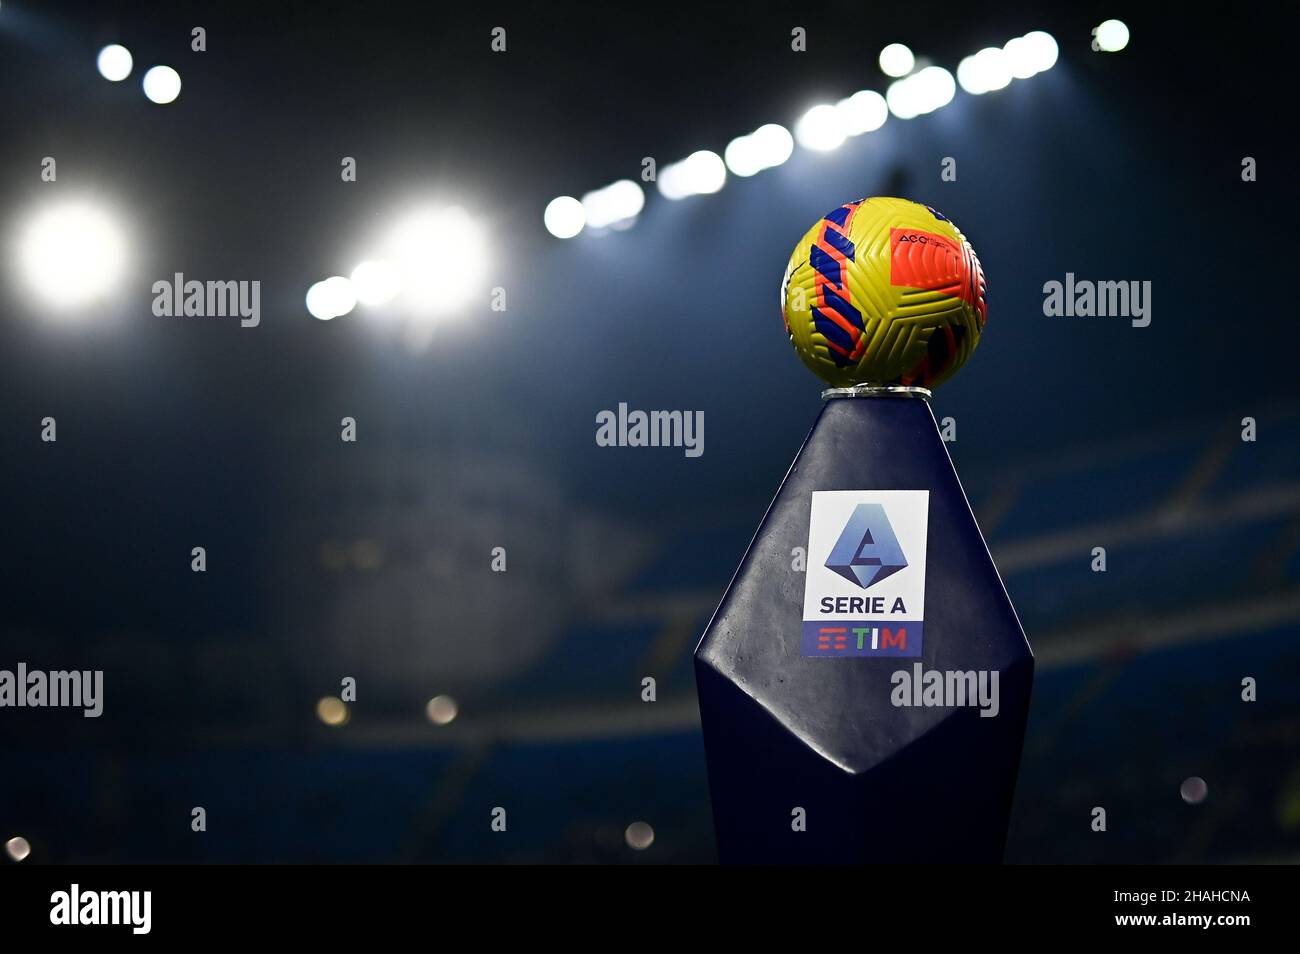 Milan, Italy. 12 December 2021. Official Serie A matchball Nike Flight Hi-Vis is seen prior to the Serie A football match between FC Internazionale and Cagliari Calcio. Credit: Nicolò Campo/Alamy Live News Stock Photo